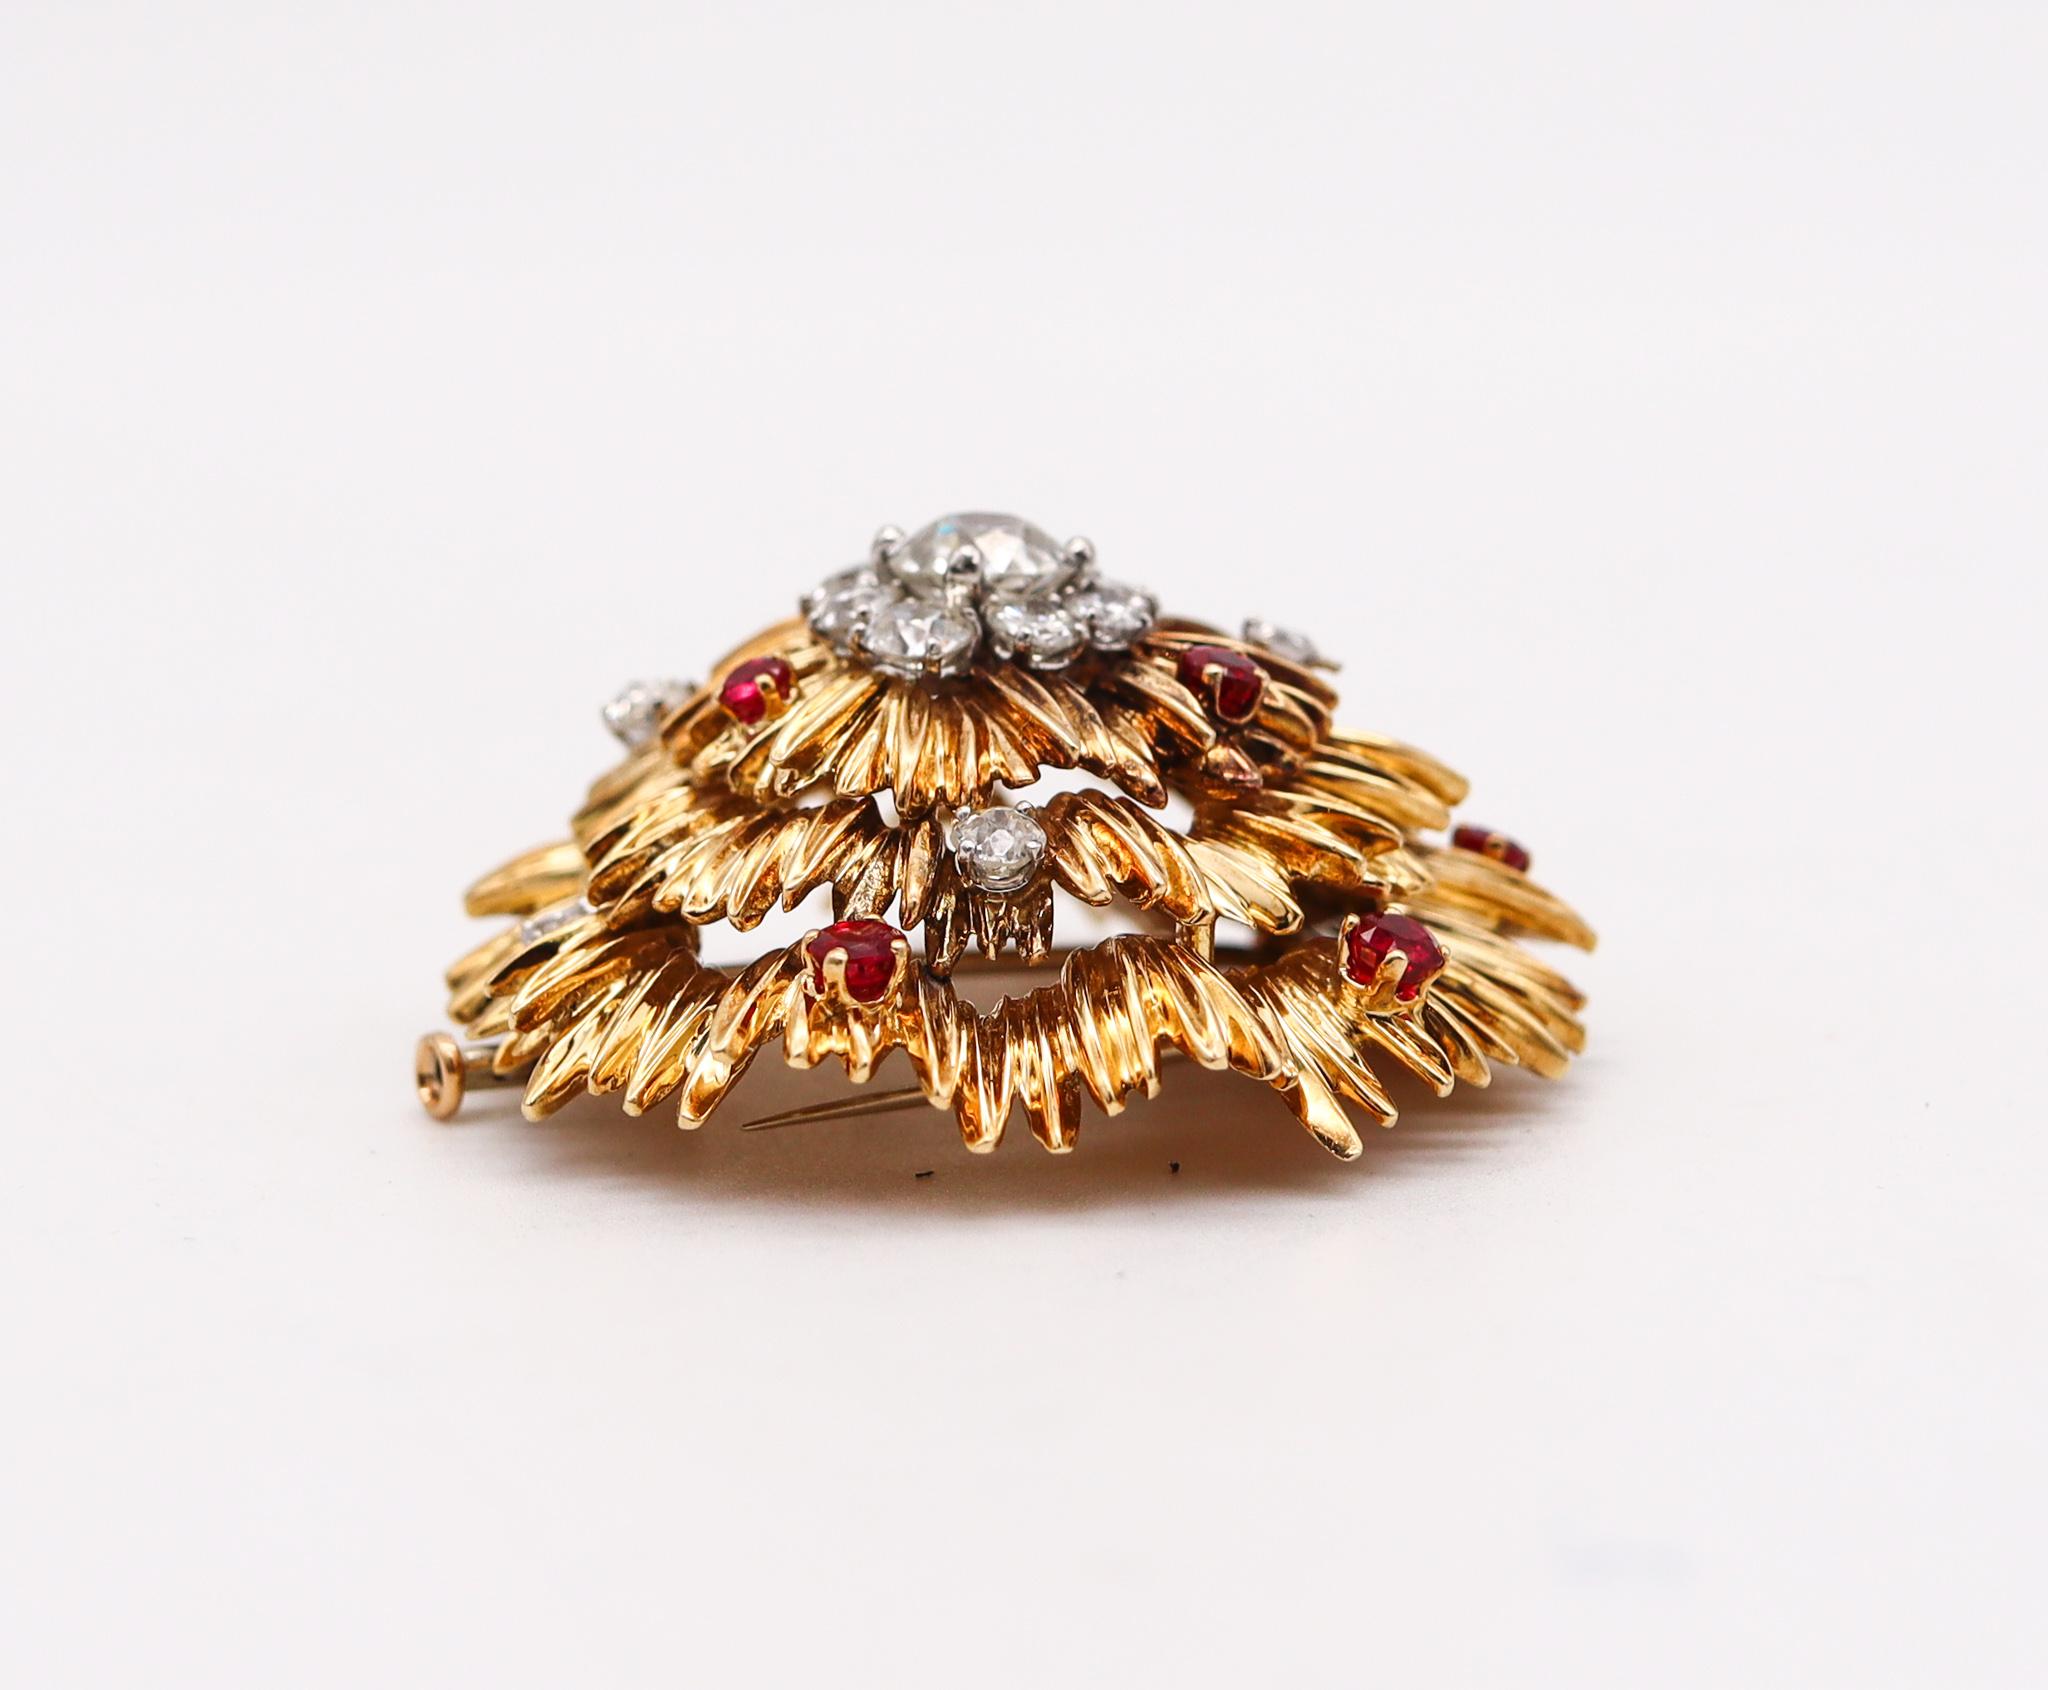 Post-War Van Cleef & Arpels 1960 Paris Brooch 18kt Gold with 4.64cts Diamonds & Rubies For Sale